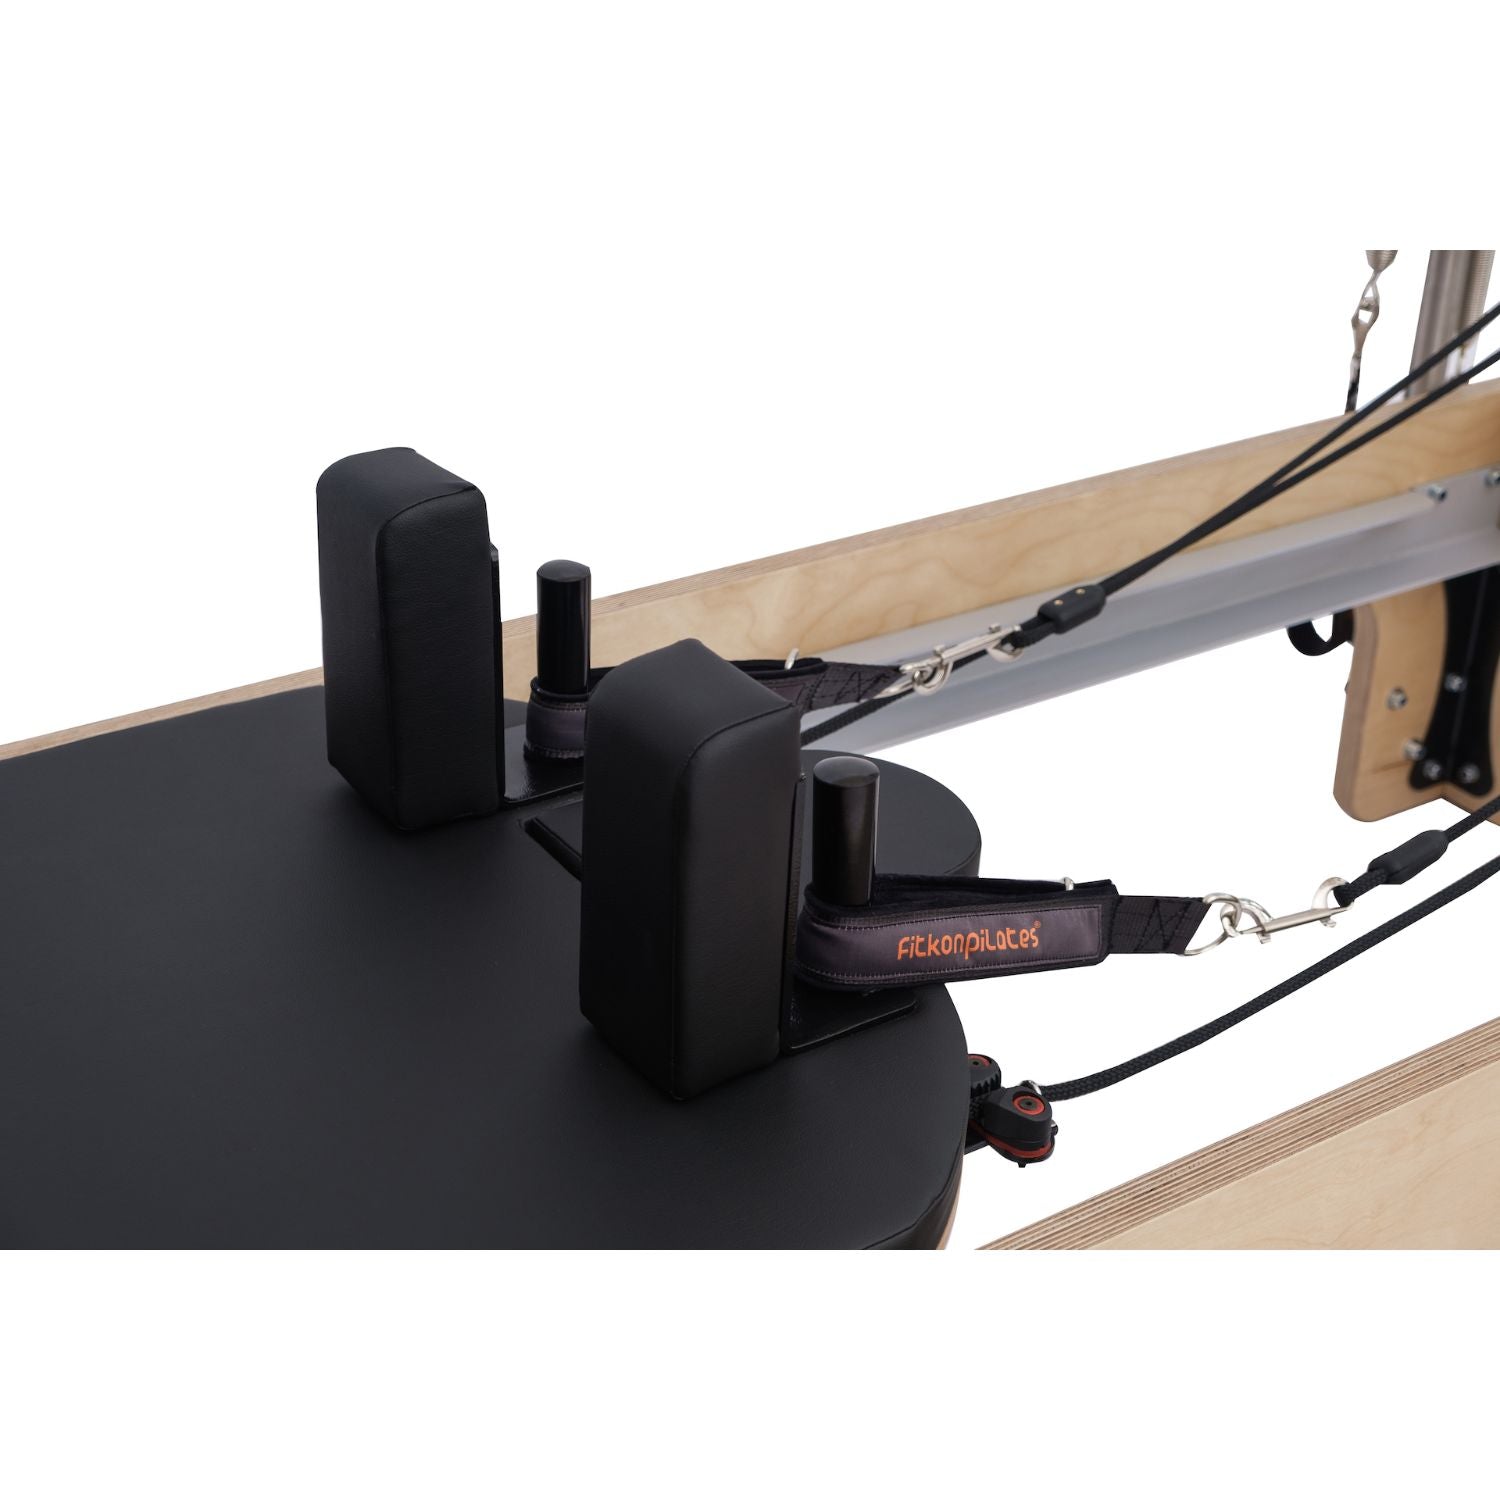 Buy Fitkon Pro Plus Pilates Reformer with Free Shipping